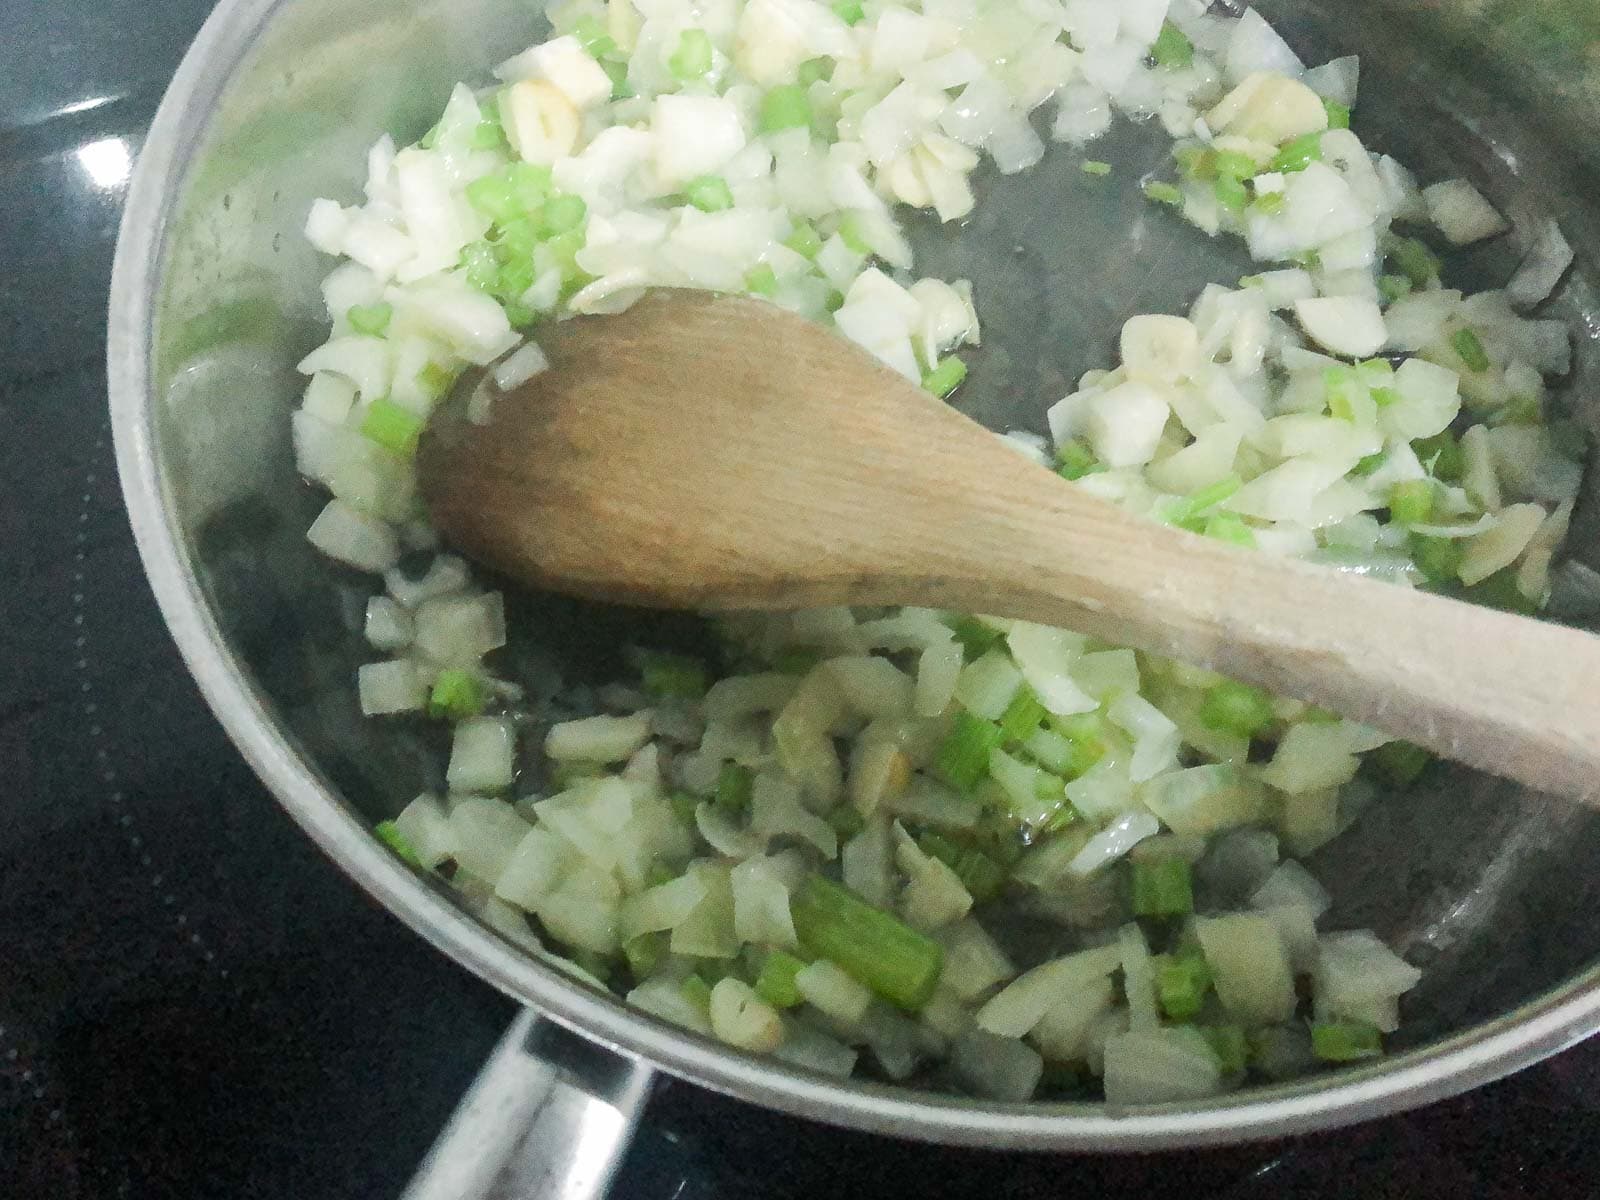 onions, garlic and celery sautéing in a pan.